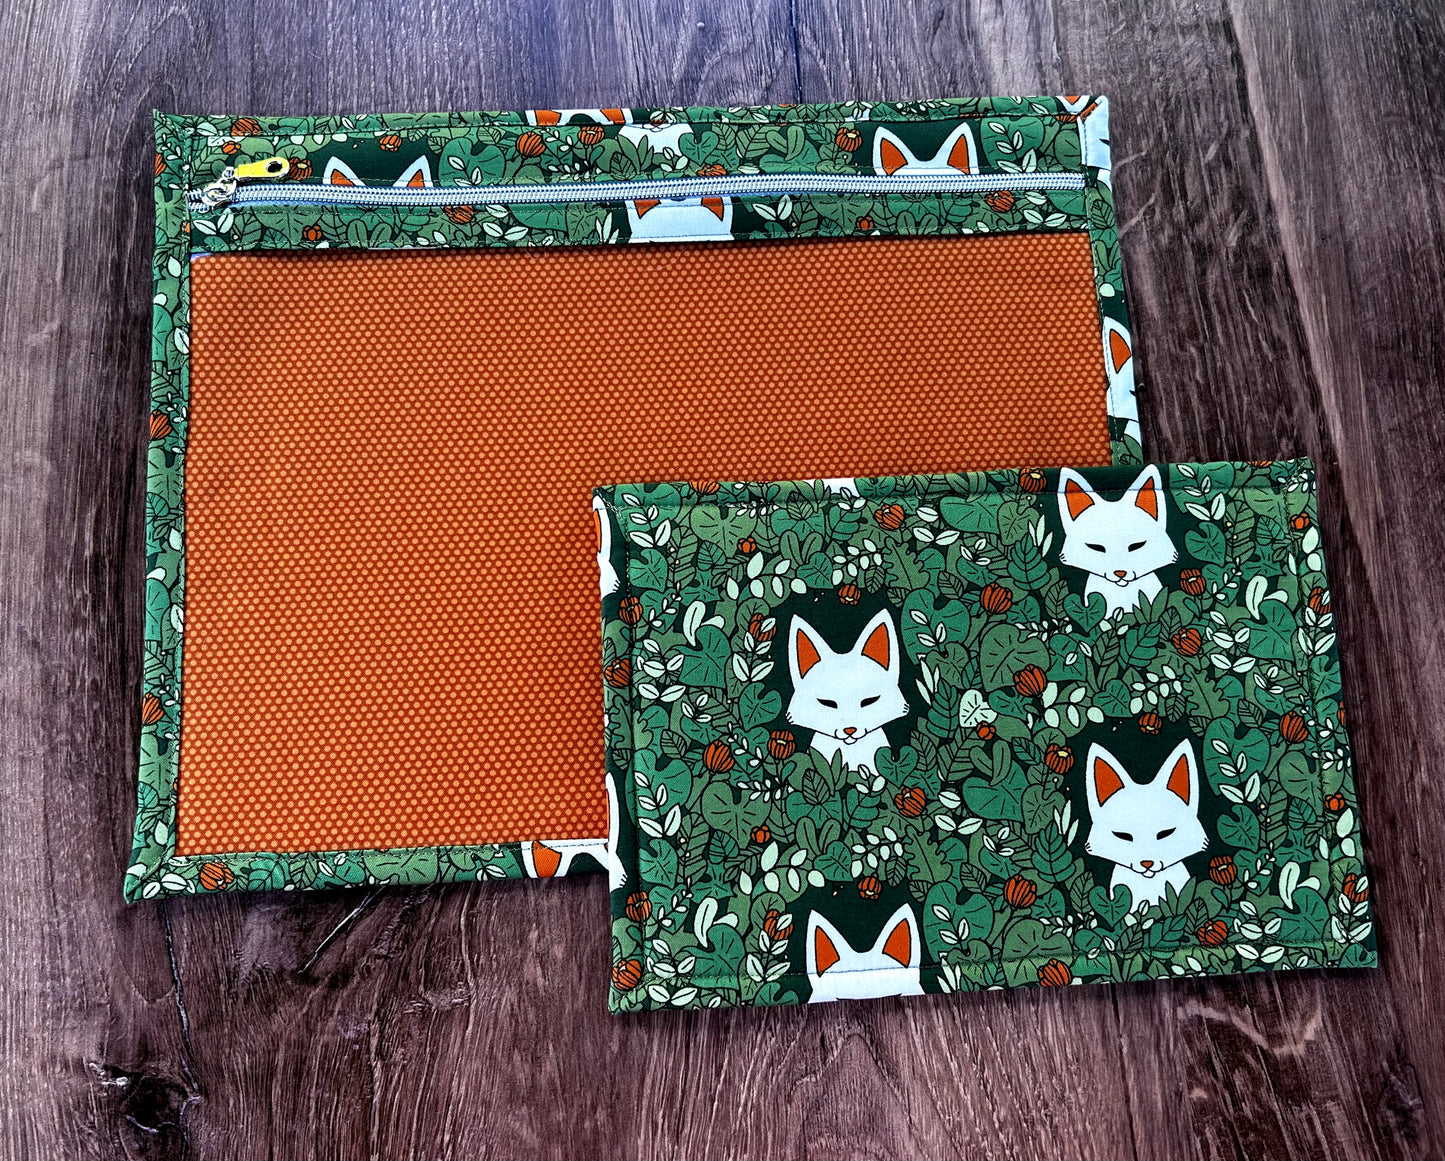 Vinyl Cross Stitch Project Bag - Embroidery bag - Project Bag - Knitting & Crochet Bag - Storage - Organizer - Fox Project Bag - Notions